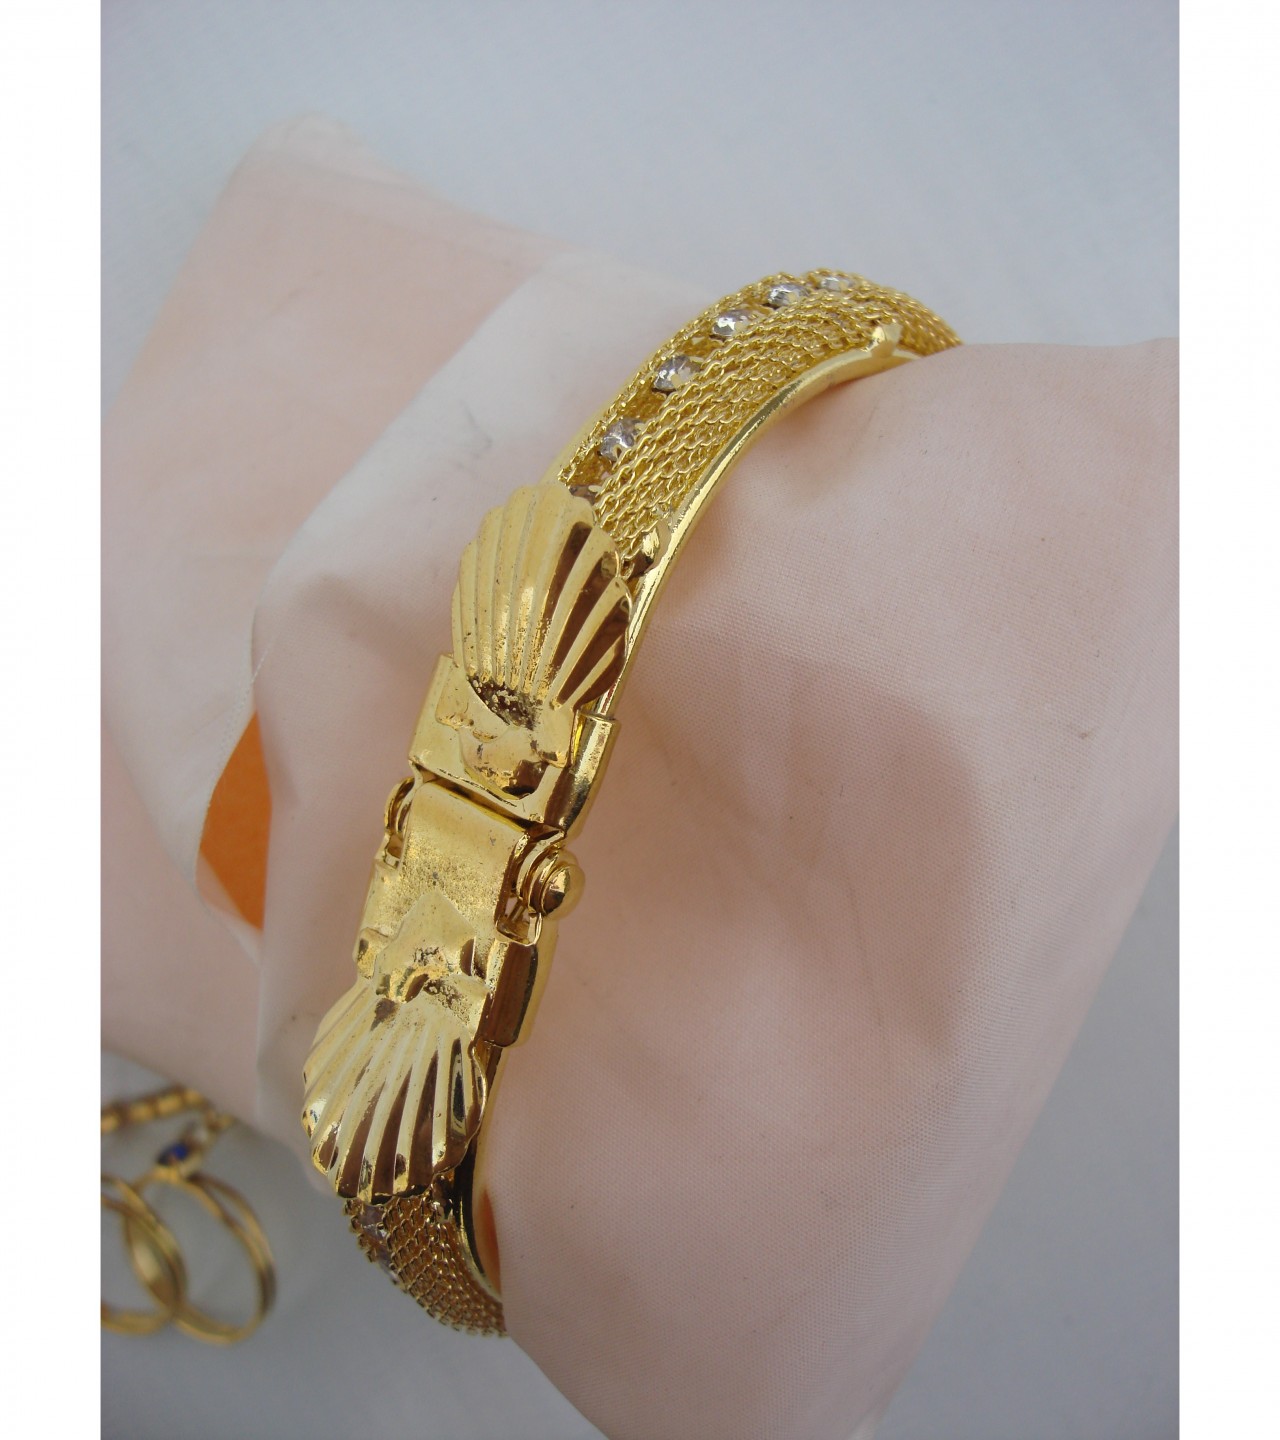 Attractive ladies watch with rings (LW-019)